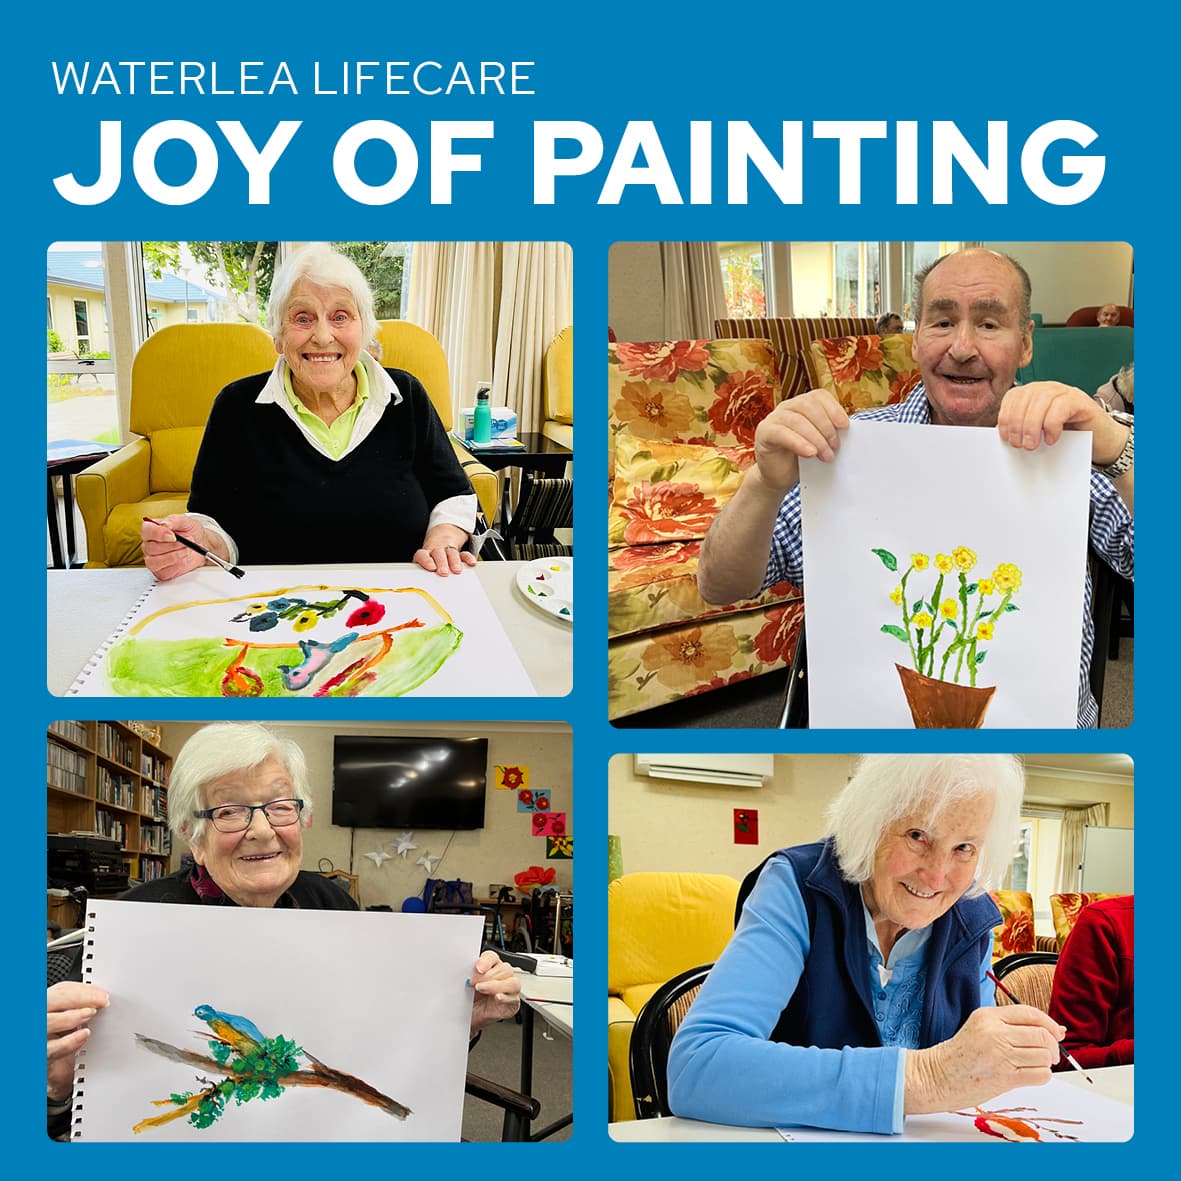 Painting day at Waterlea Lifecare